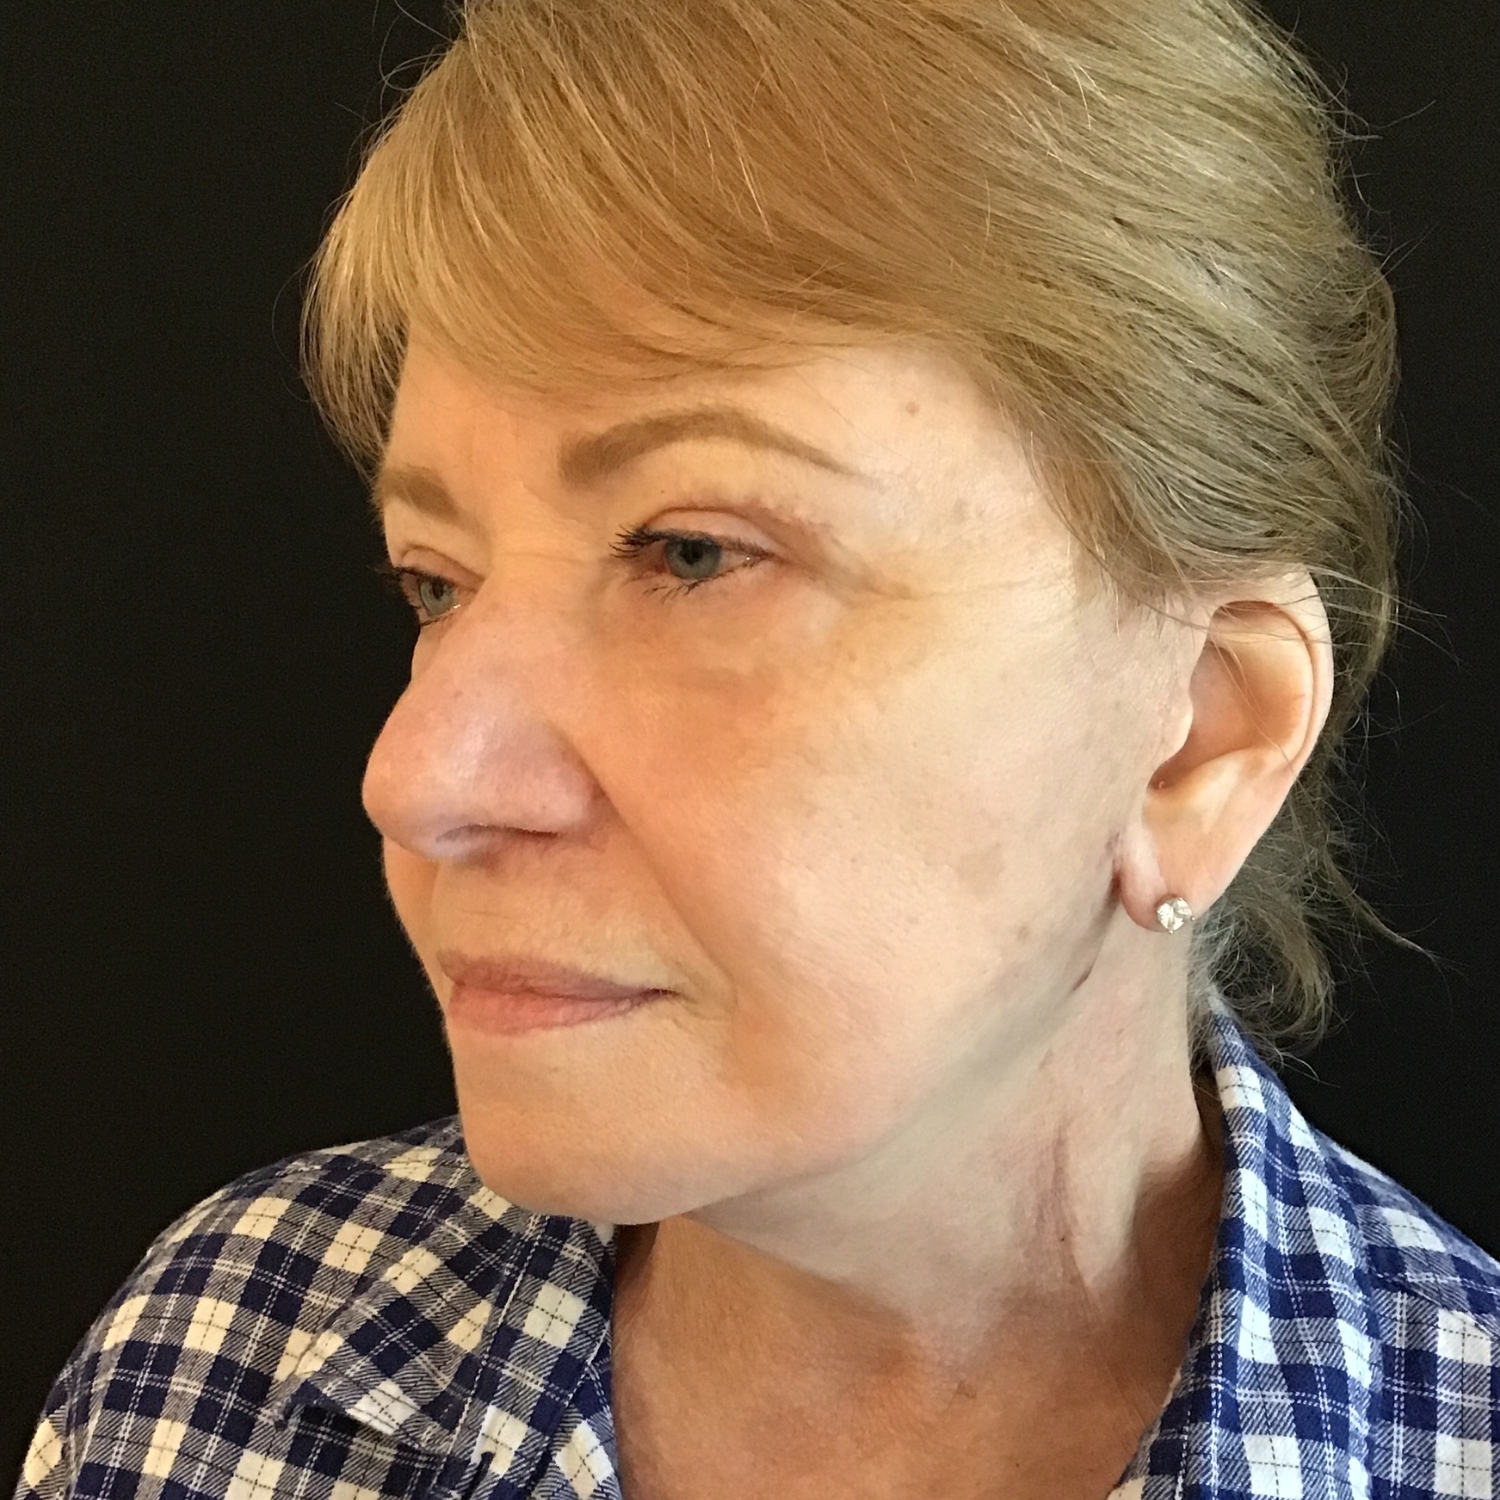 Facelift Results Before and After